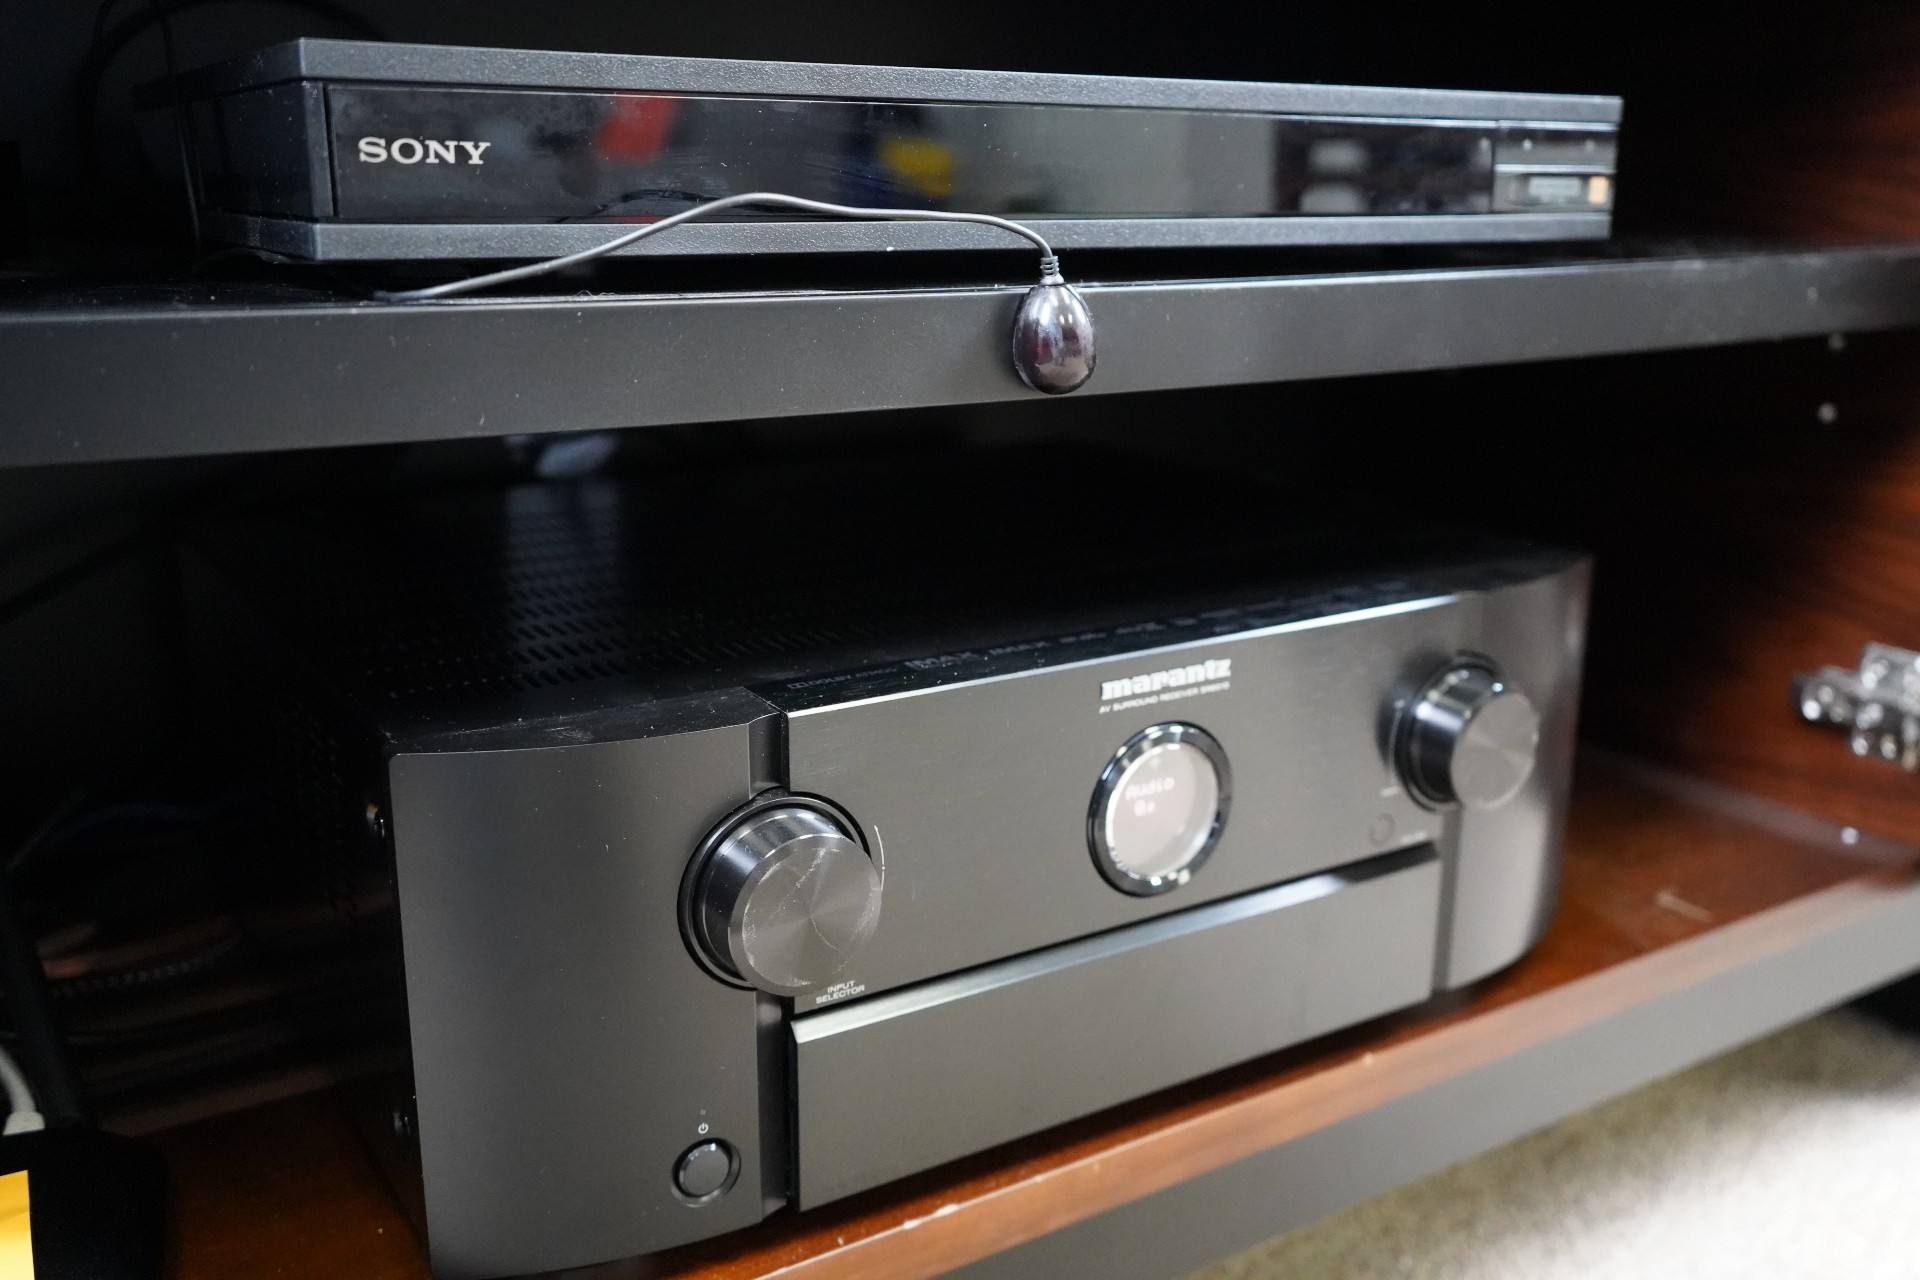 A Marantz A/V receiver and Sony 4K Blu-ray player controlled with an IR blaster from an Amazon Fire TV Omni QLED TV.